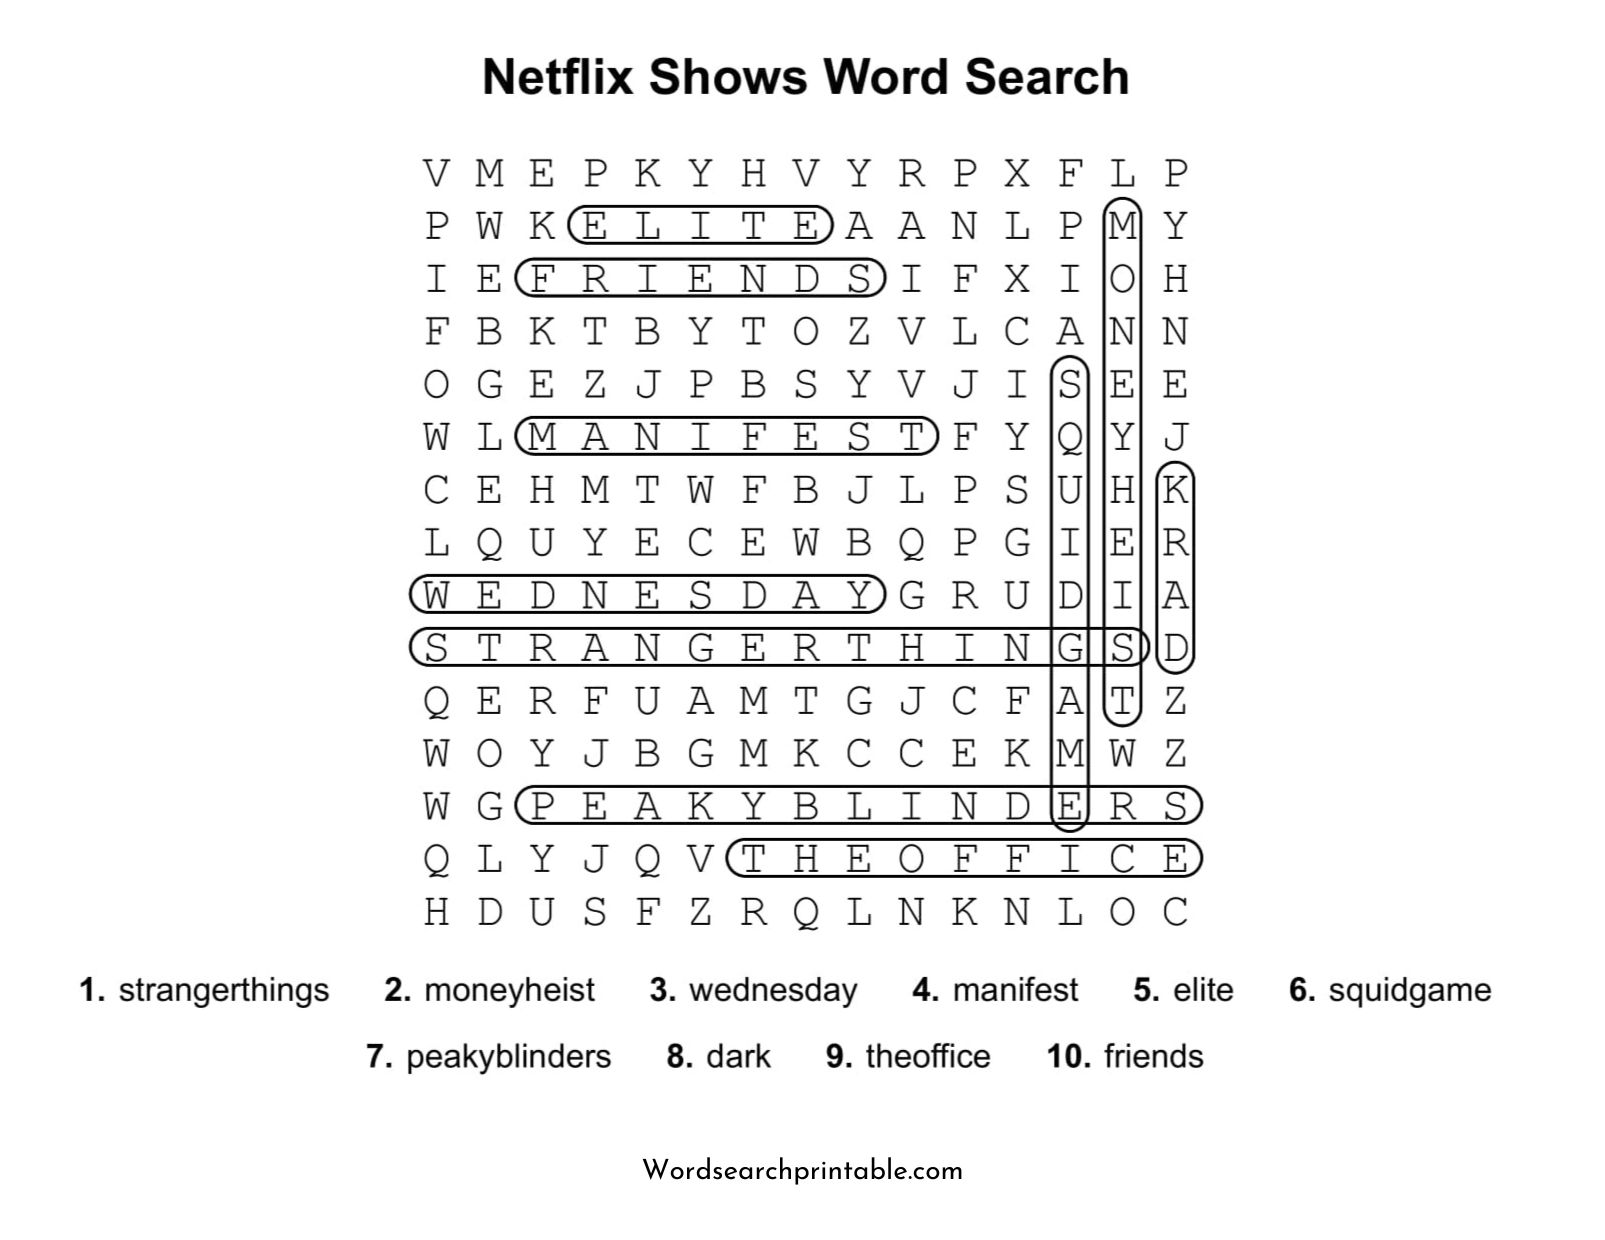 netflix shows word search puzzle solution